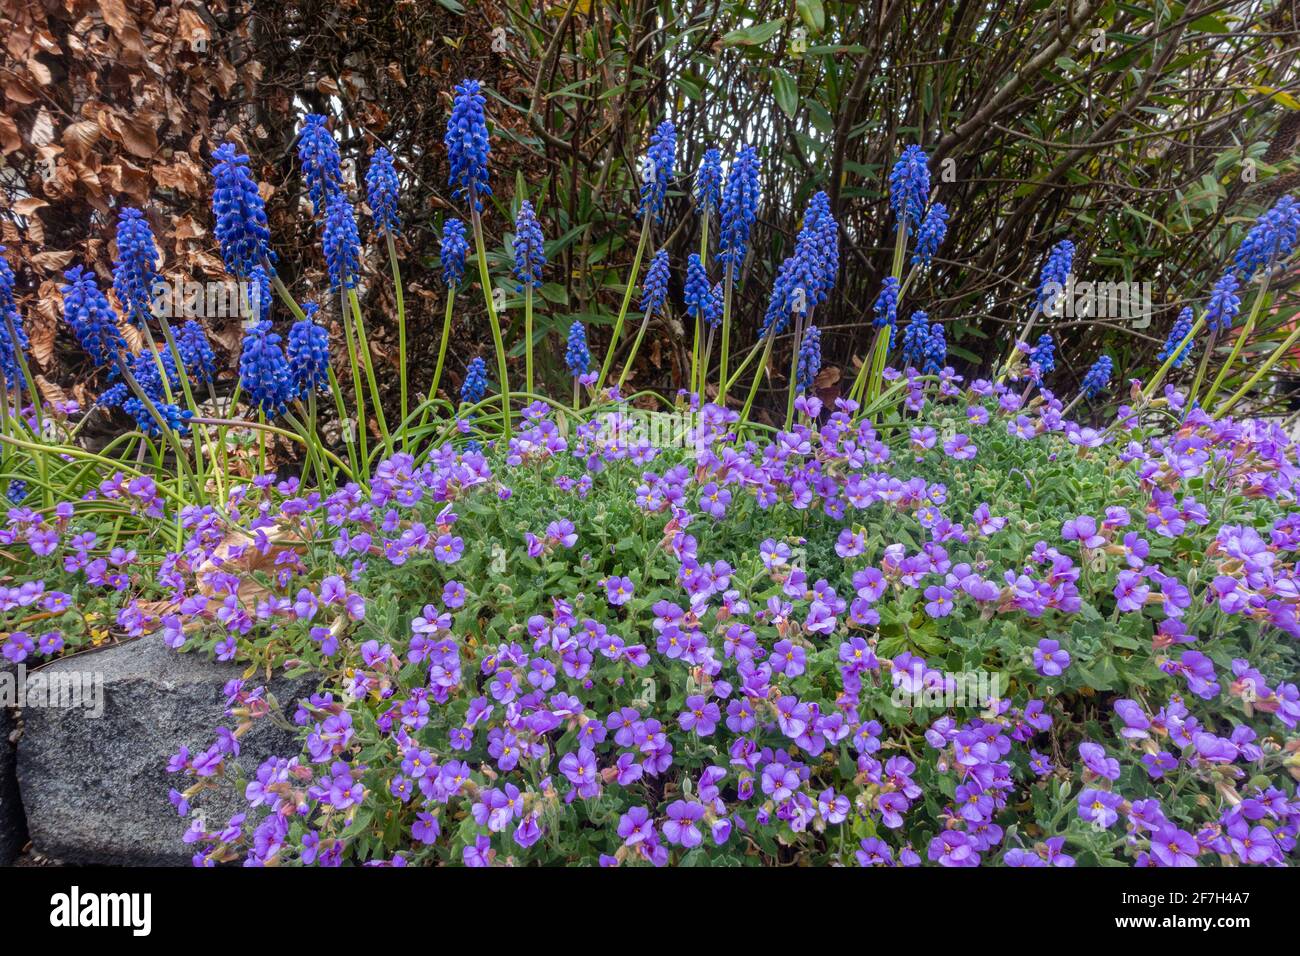 A raised flower bed with violet aubretia tumbling forward and blue spikes of grape hyacinth behind seem in spring (April) in a garden in The UK. Stock Photo